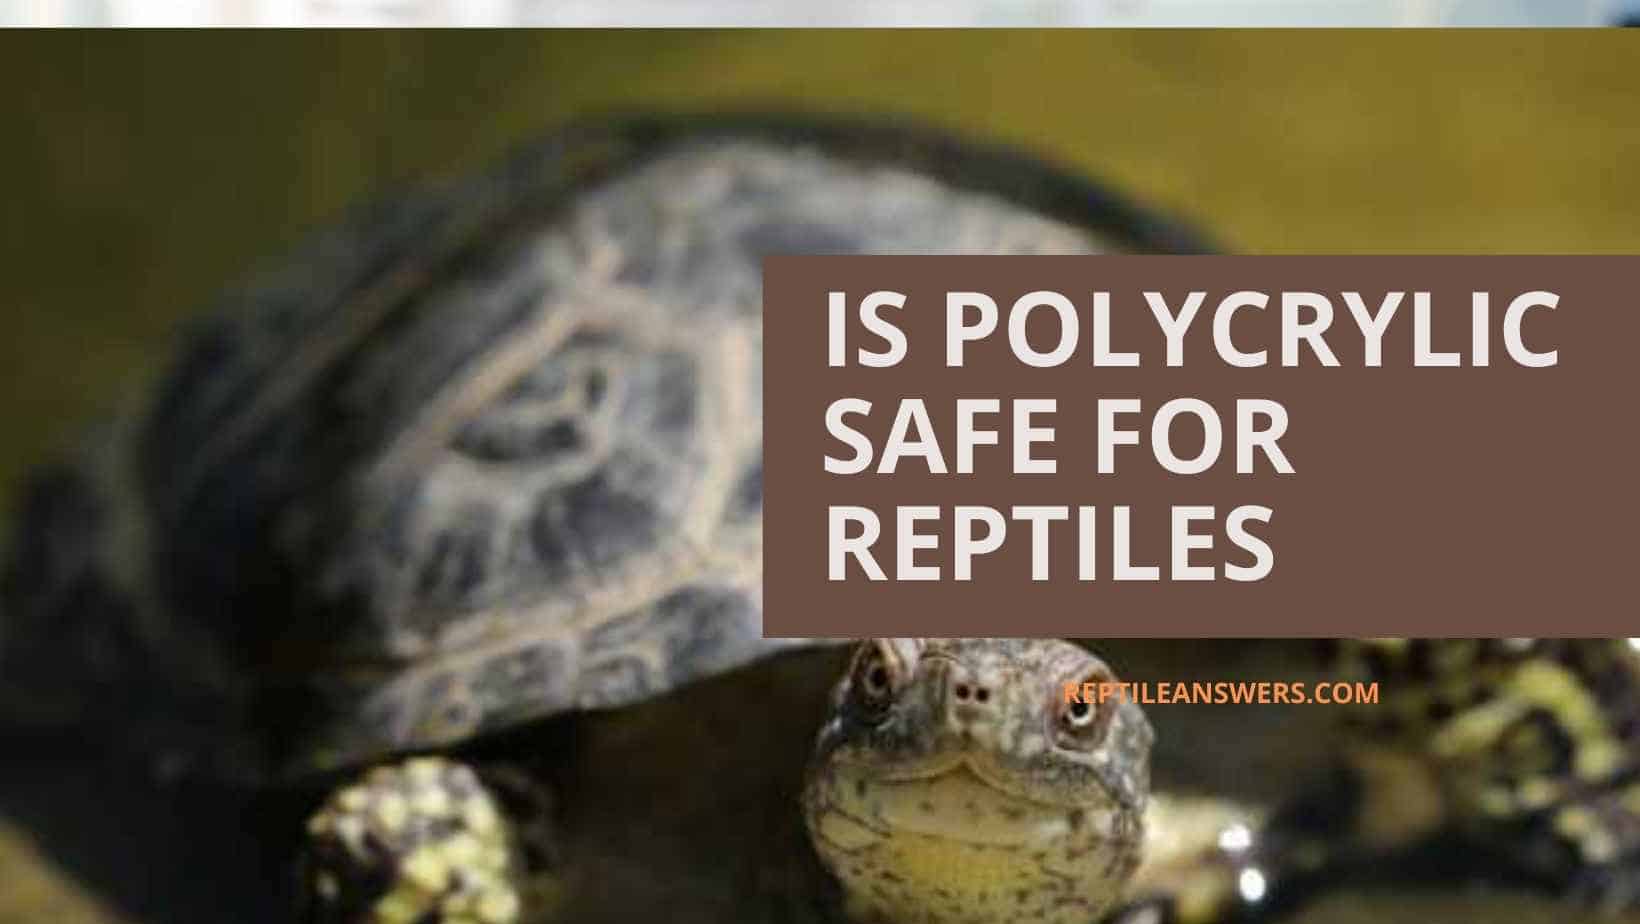 Is polycrylic safe for reptiles